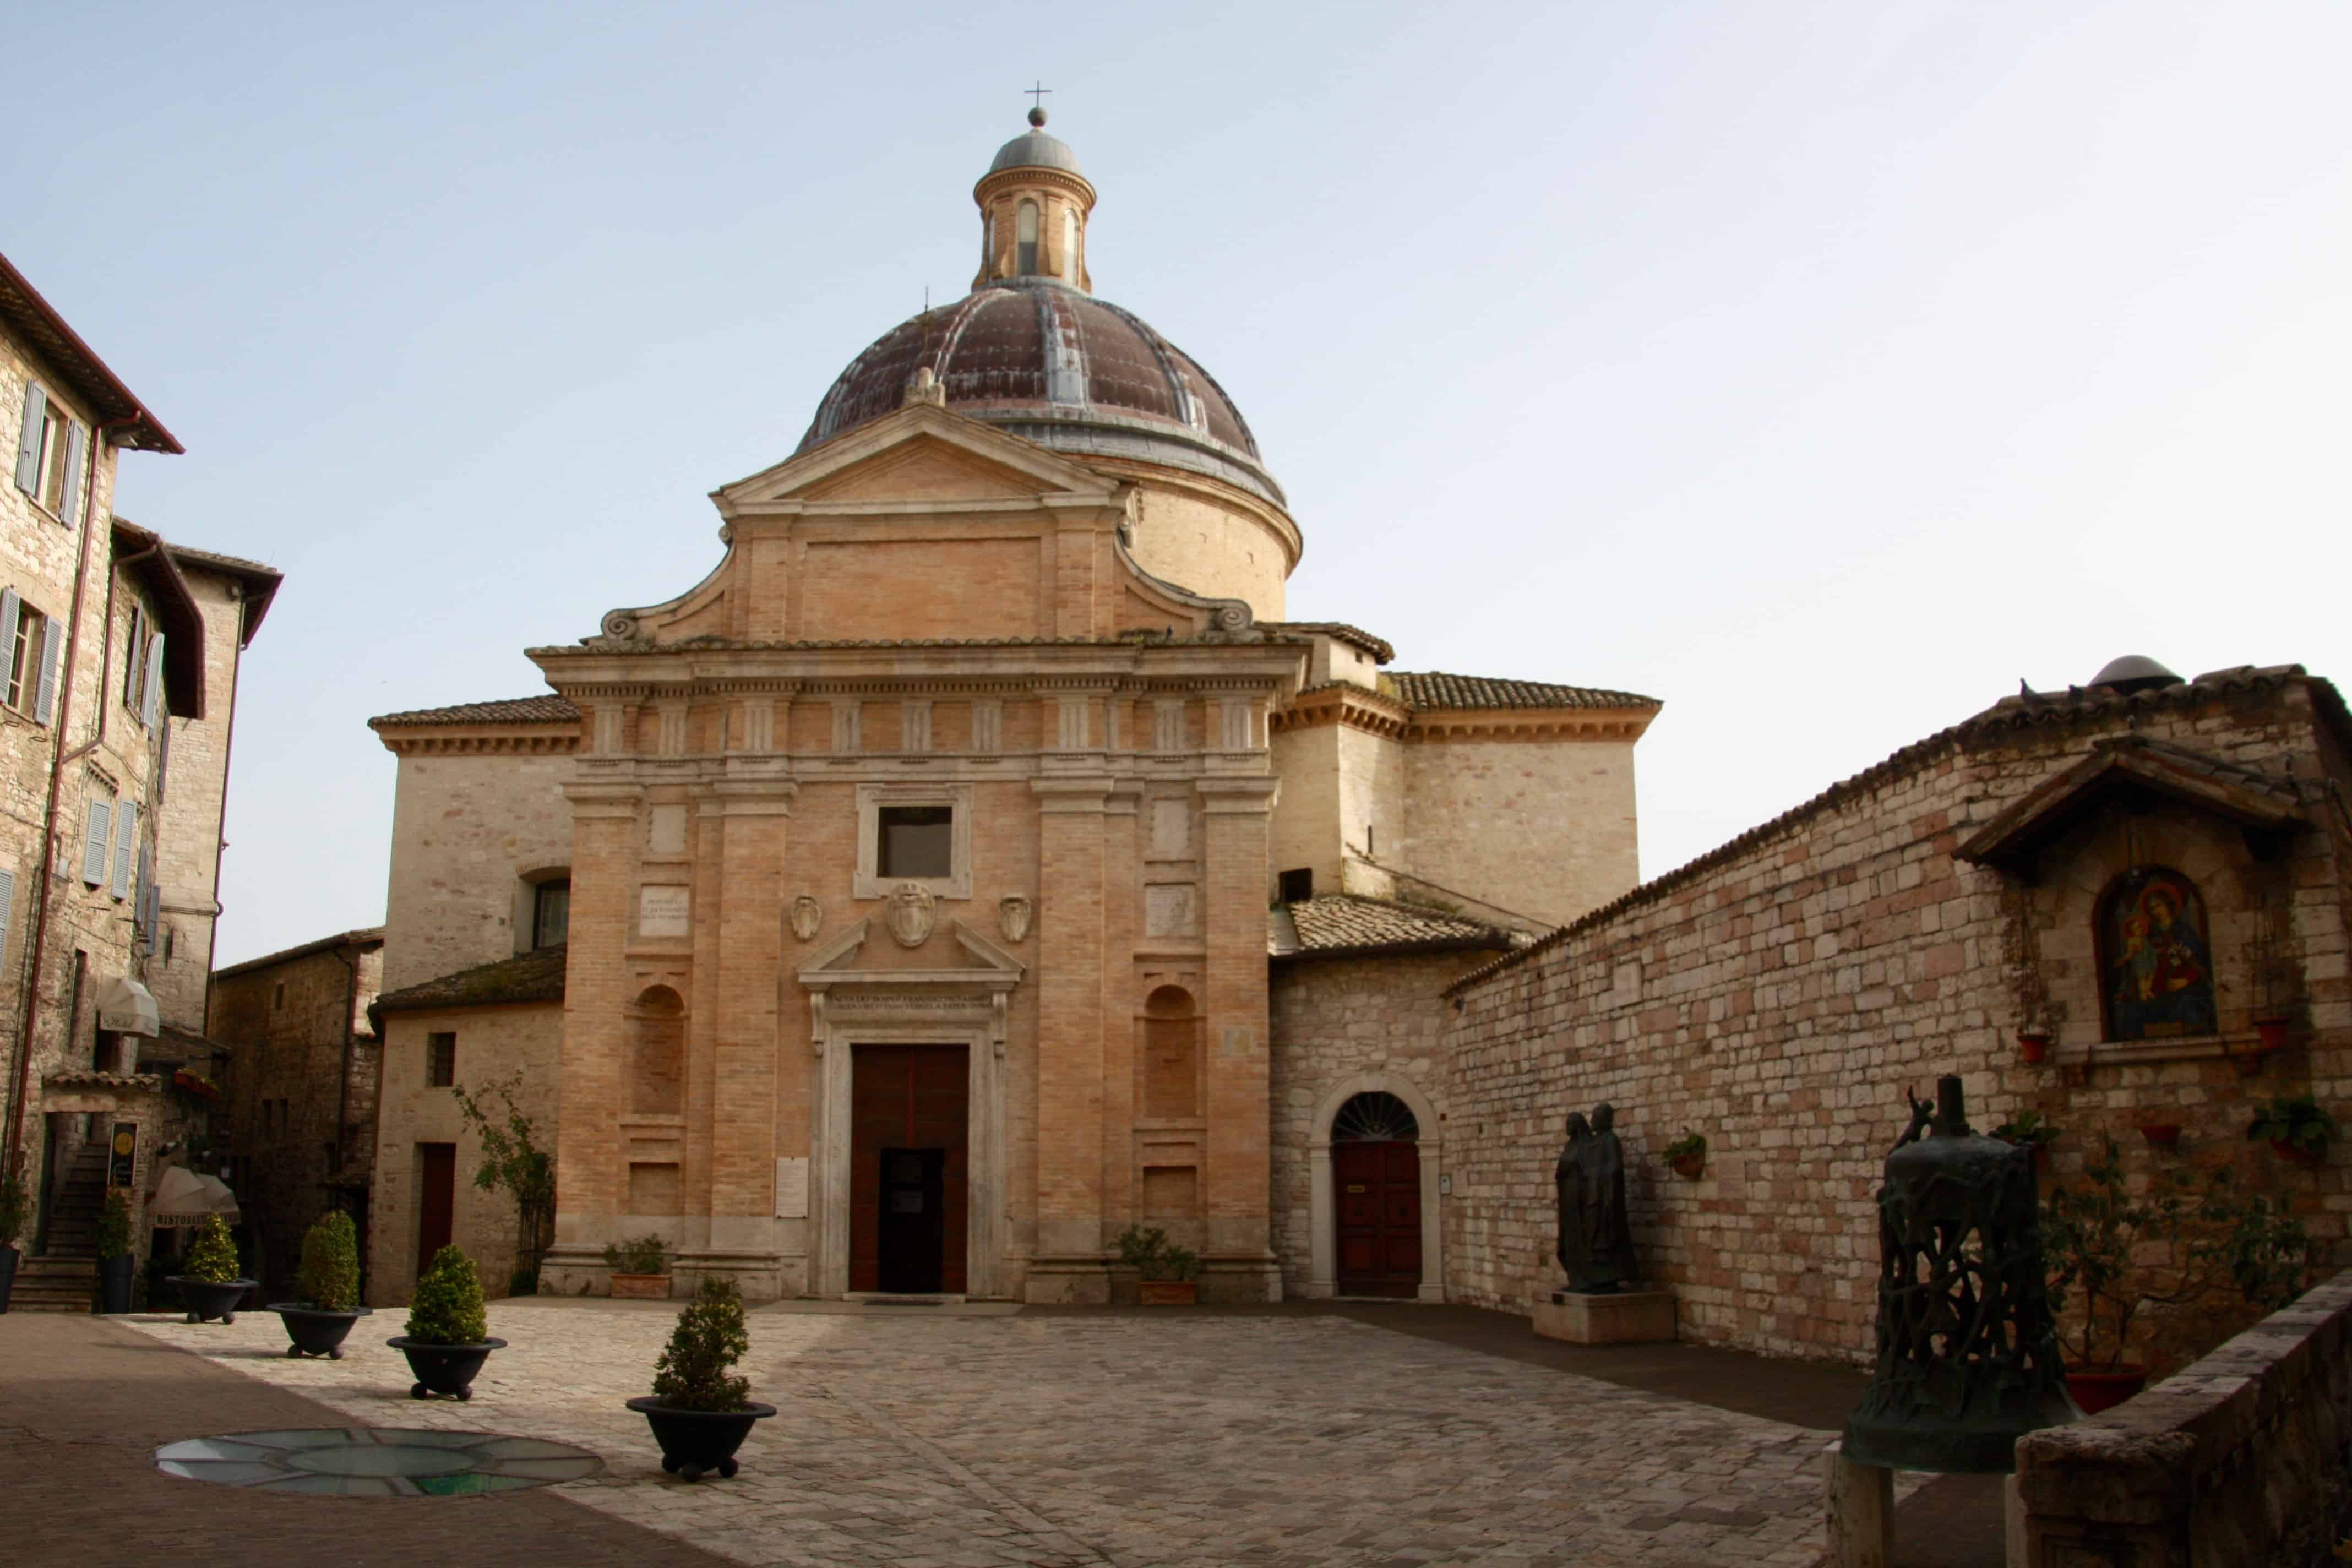 Chiesa Nuova in Assisi, said to be built on the site of St Francis' birth and childhood home.